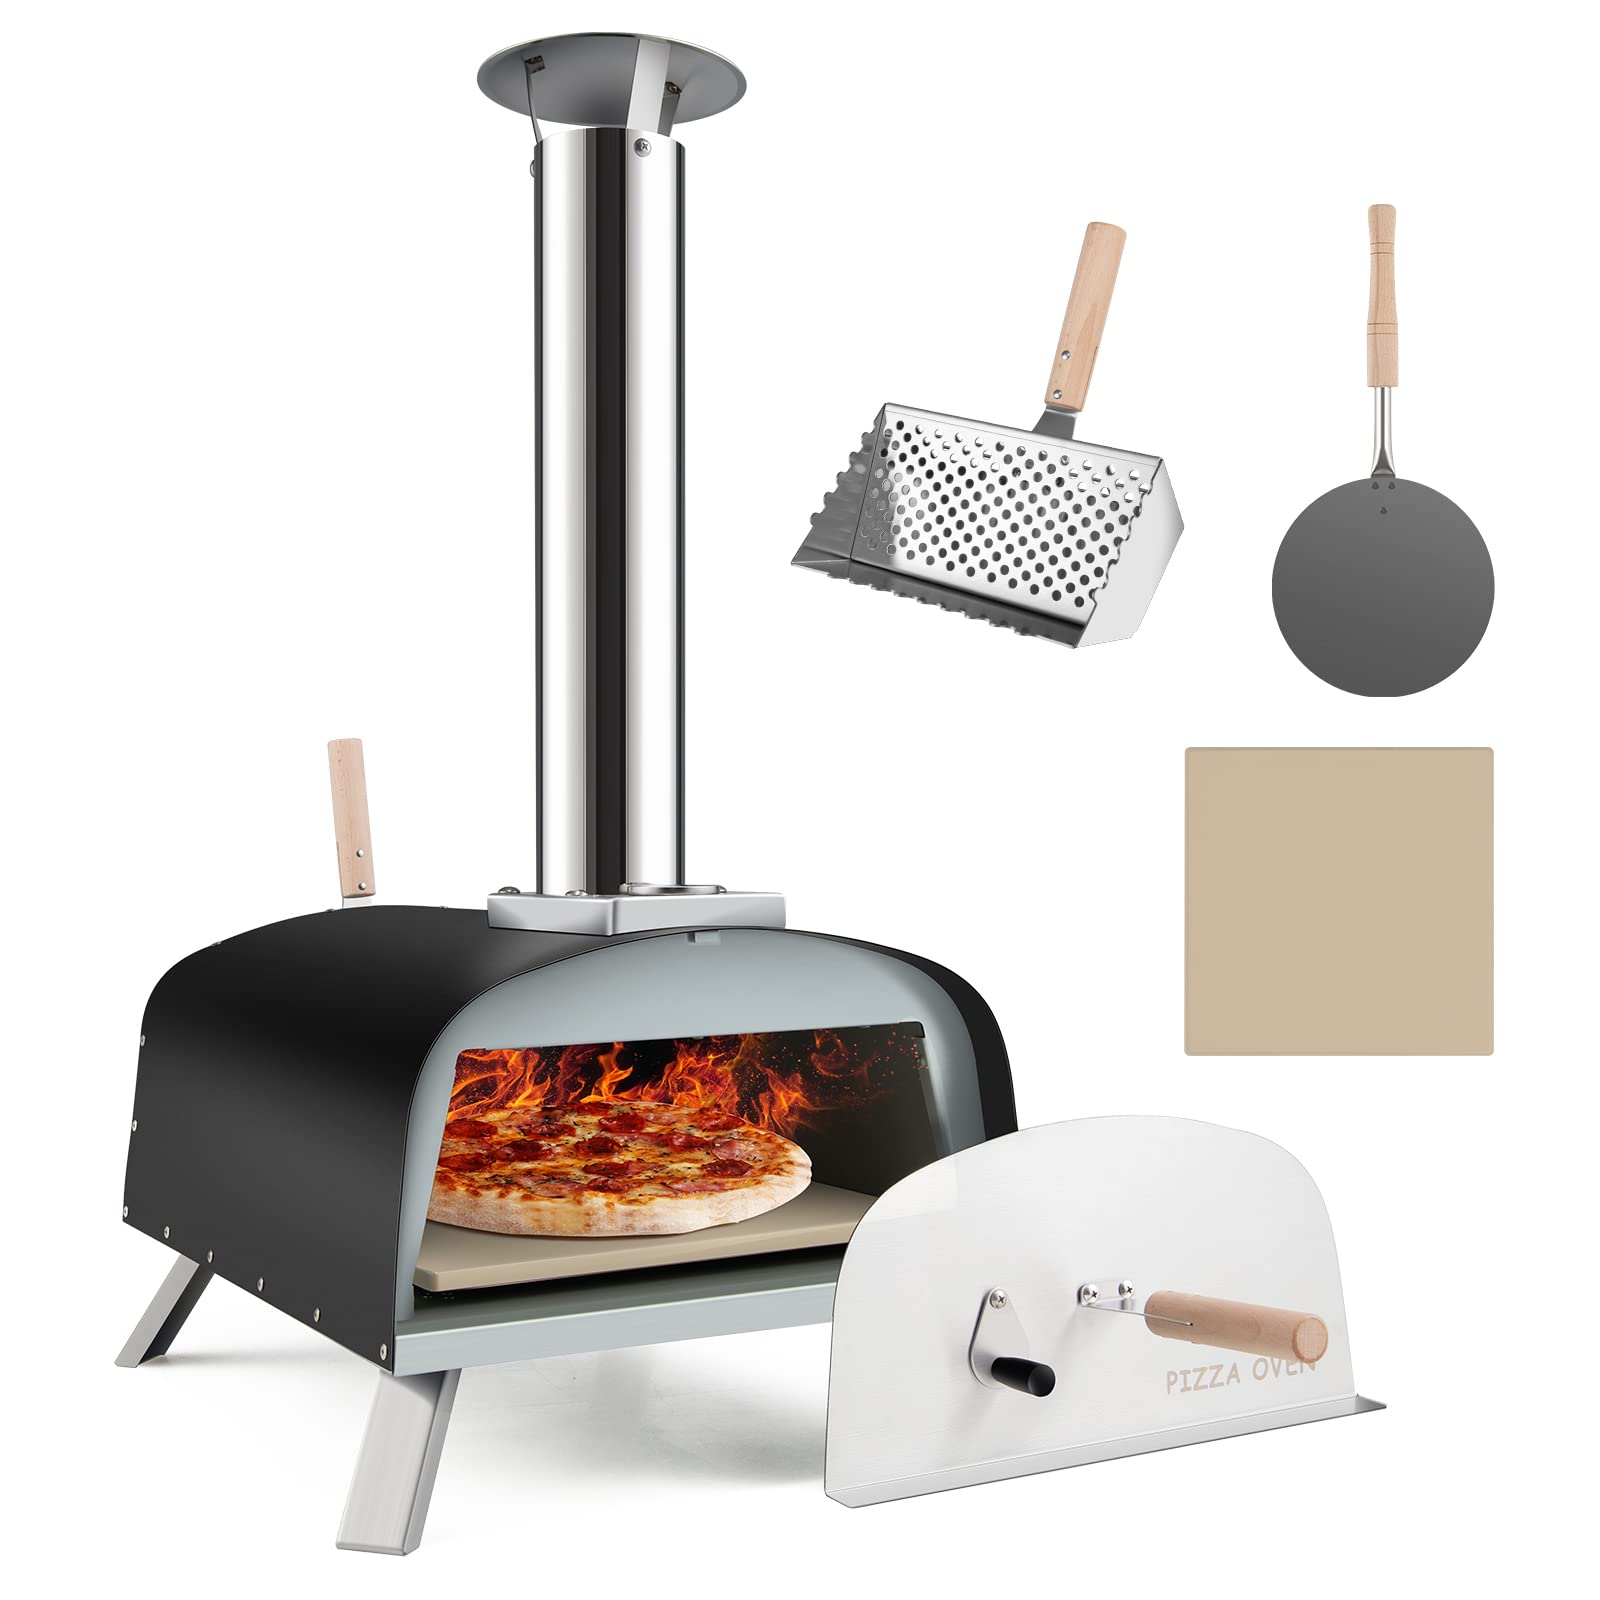 Giantex Pizza Oven, Outdoor Wood Fired Pizza Oven